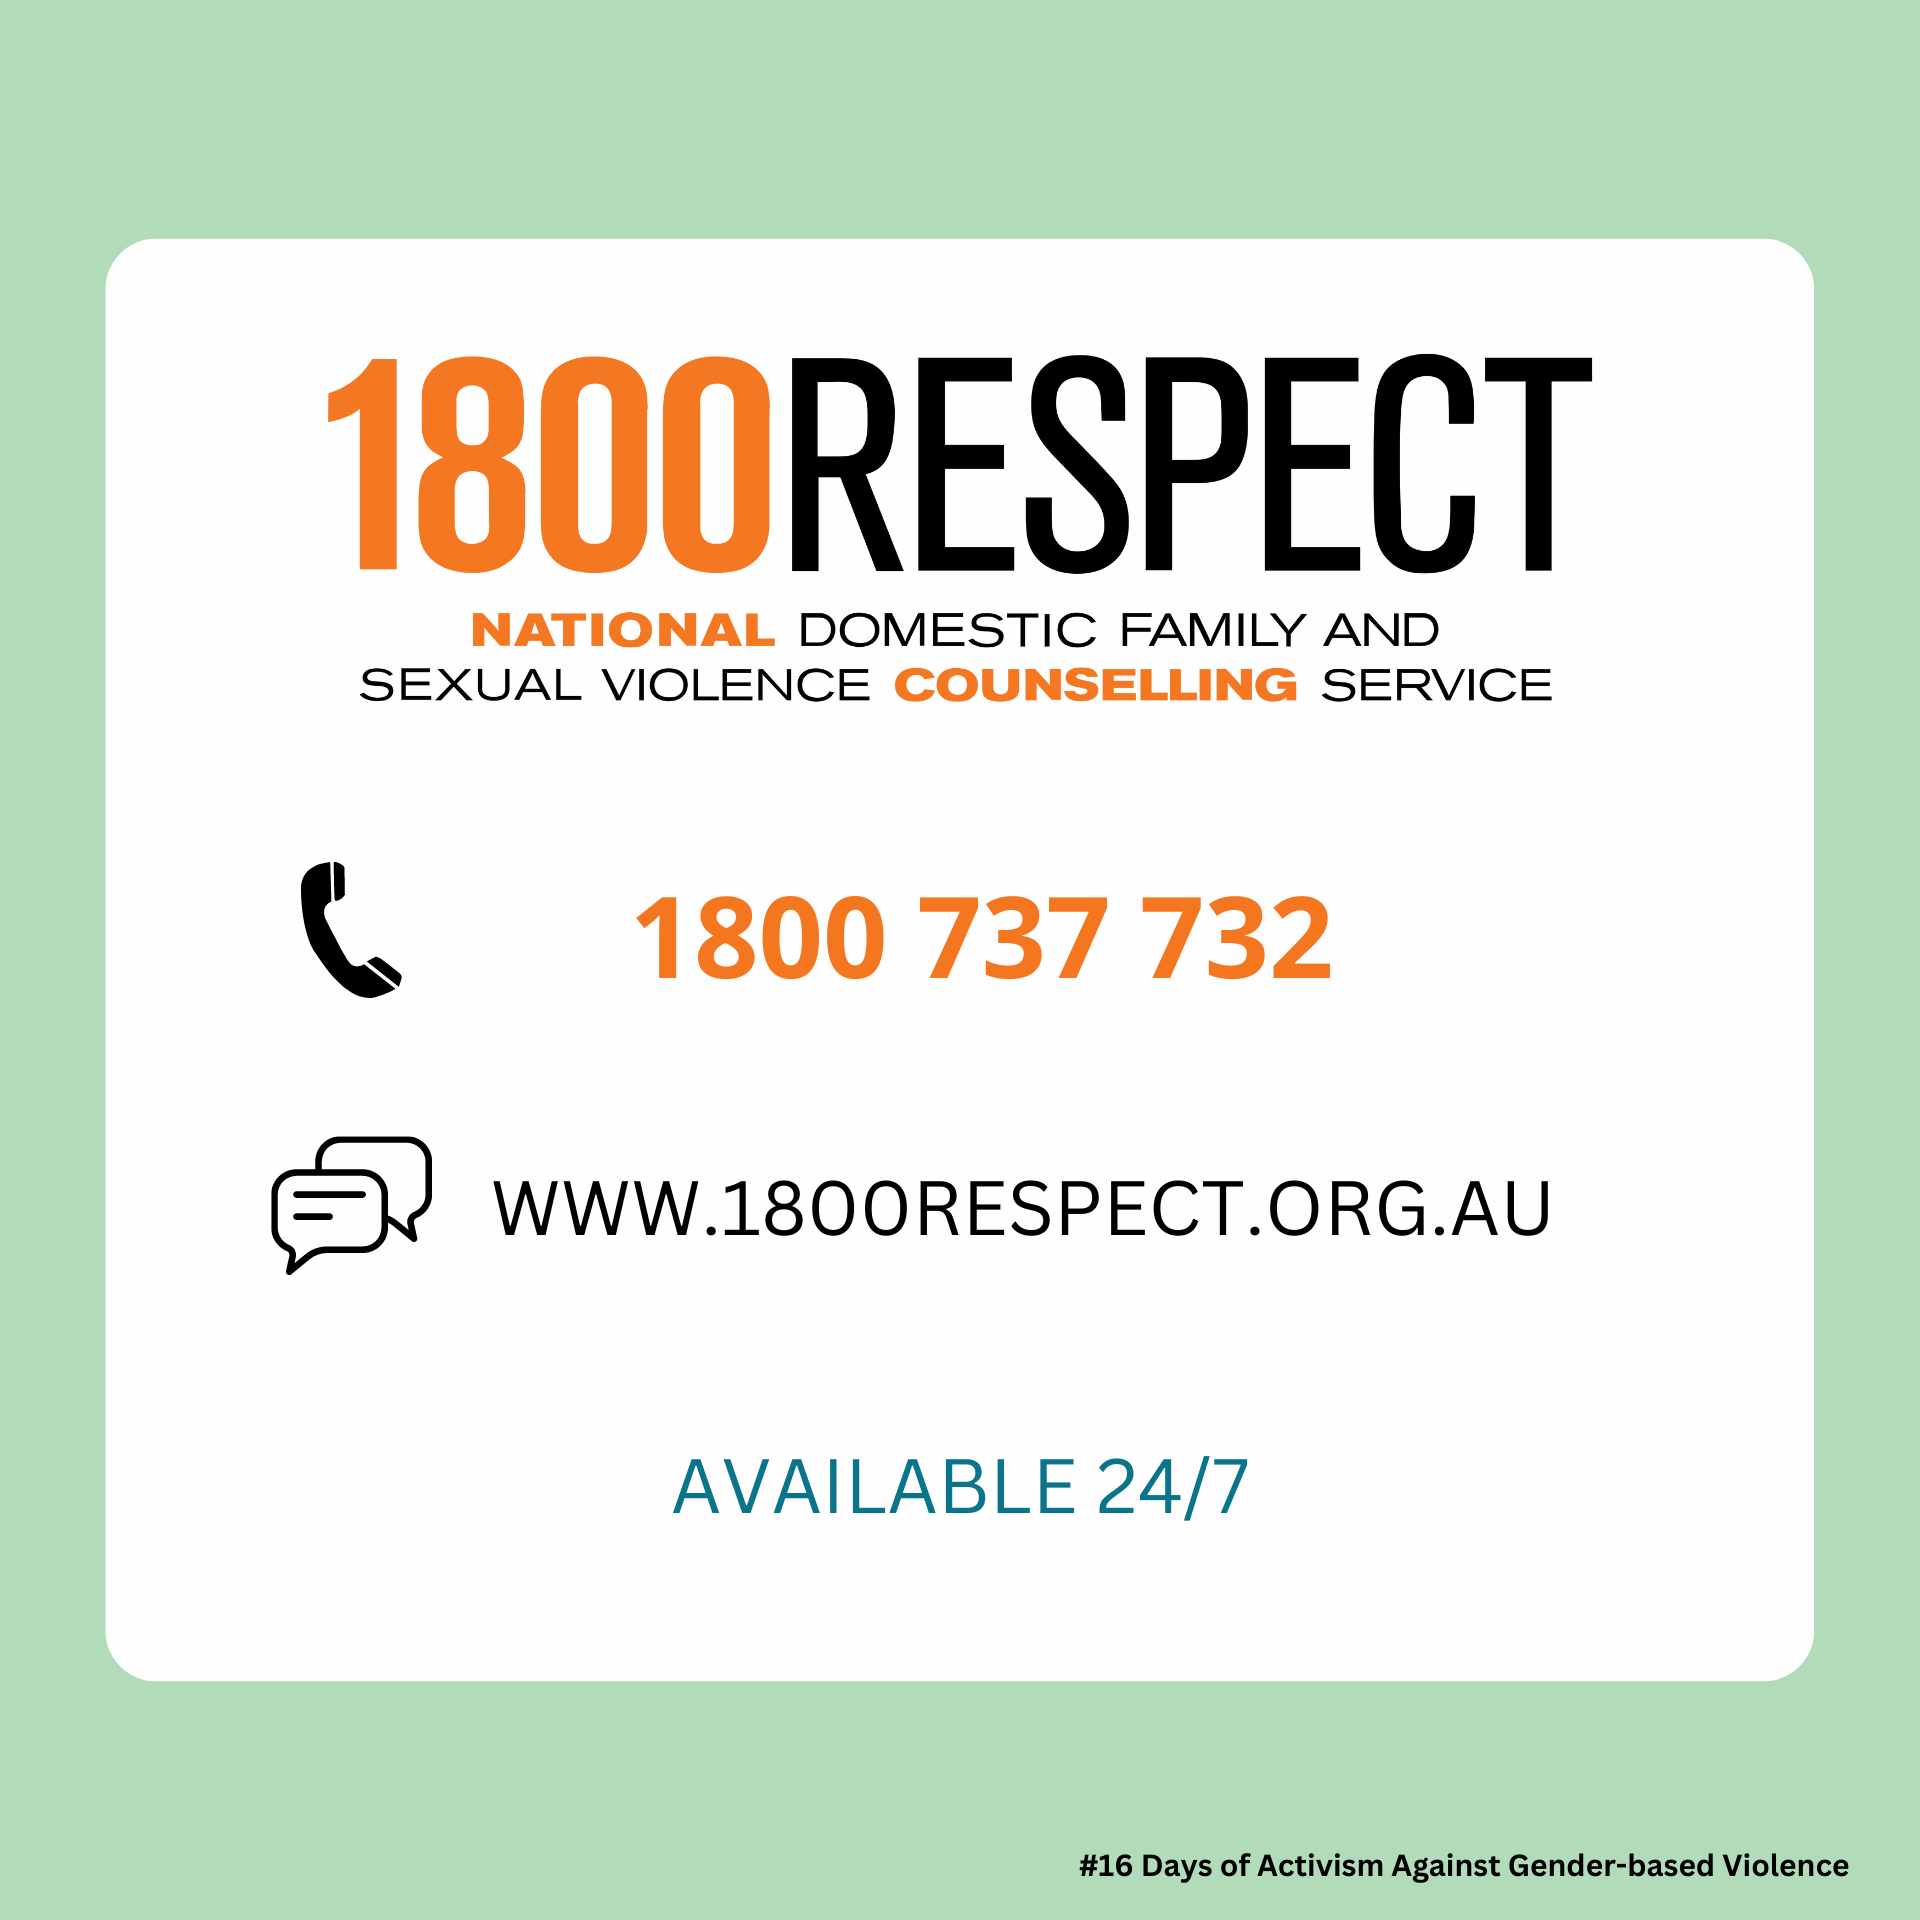 1800RESPECT Contact